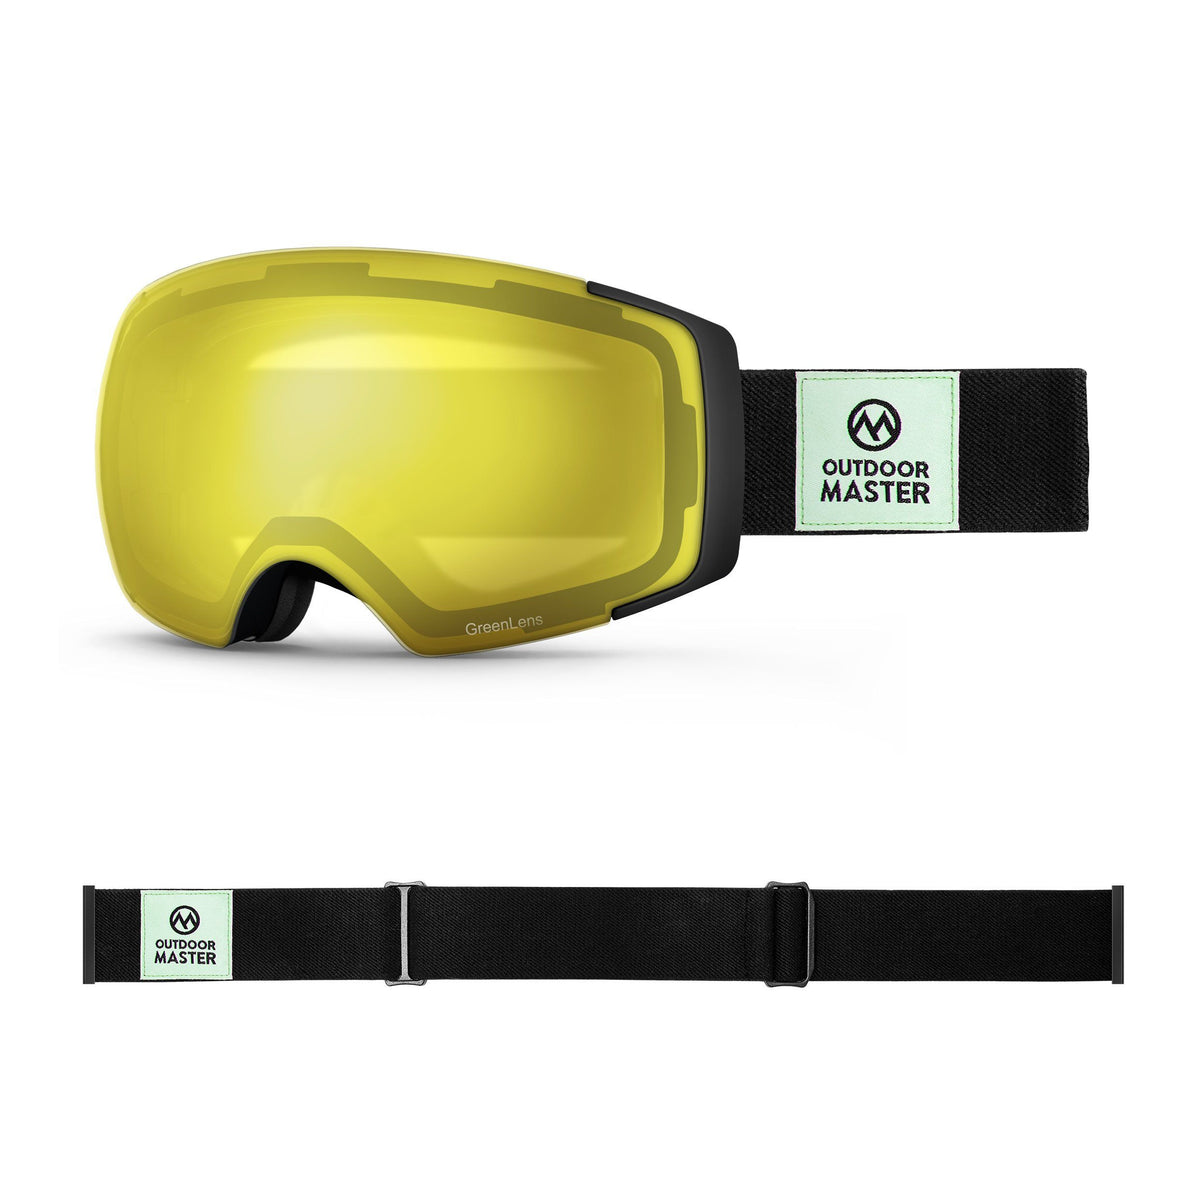 Eco-friendly Ski Goggles Pro Series - The Disappearing Places/Classic BambooStraps Limited Edition OutdoorMaster GreenLens VLT 75% TAC Yellow Lens Polarized Classic BambooStraps